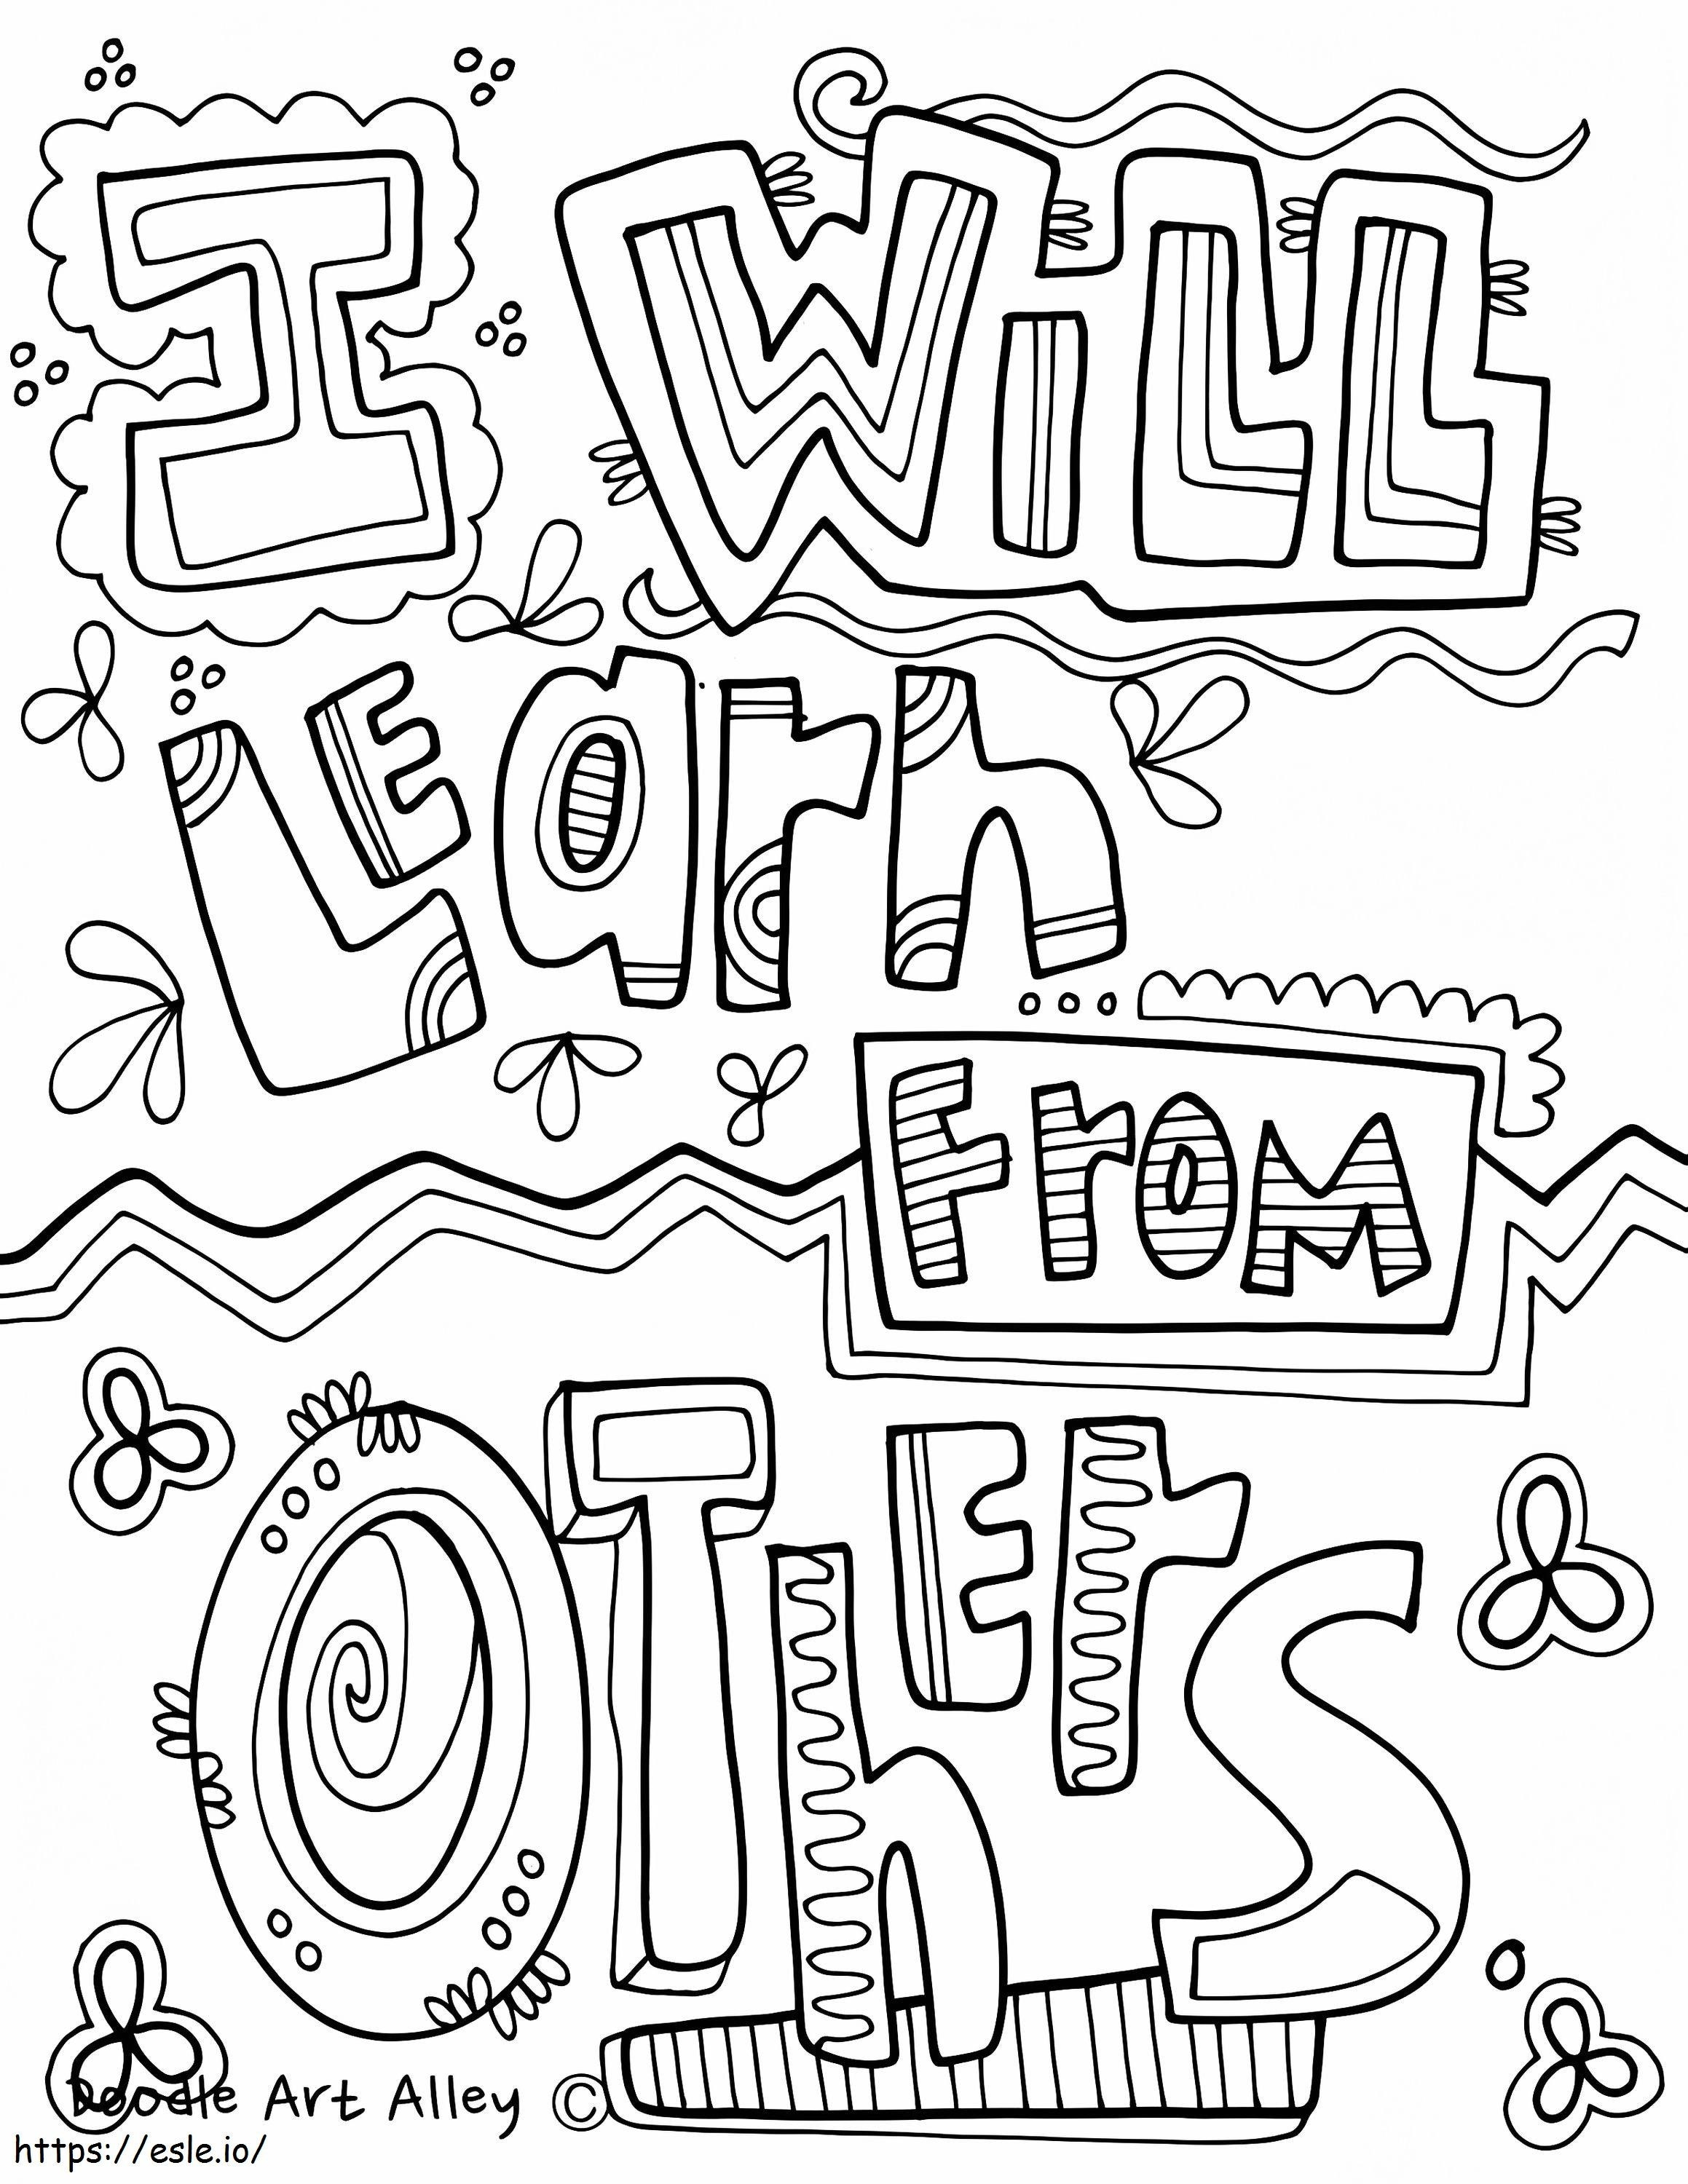 Learn From Others coloring page